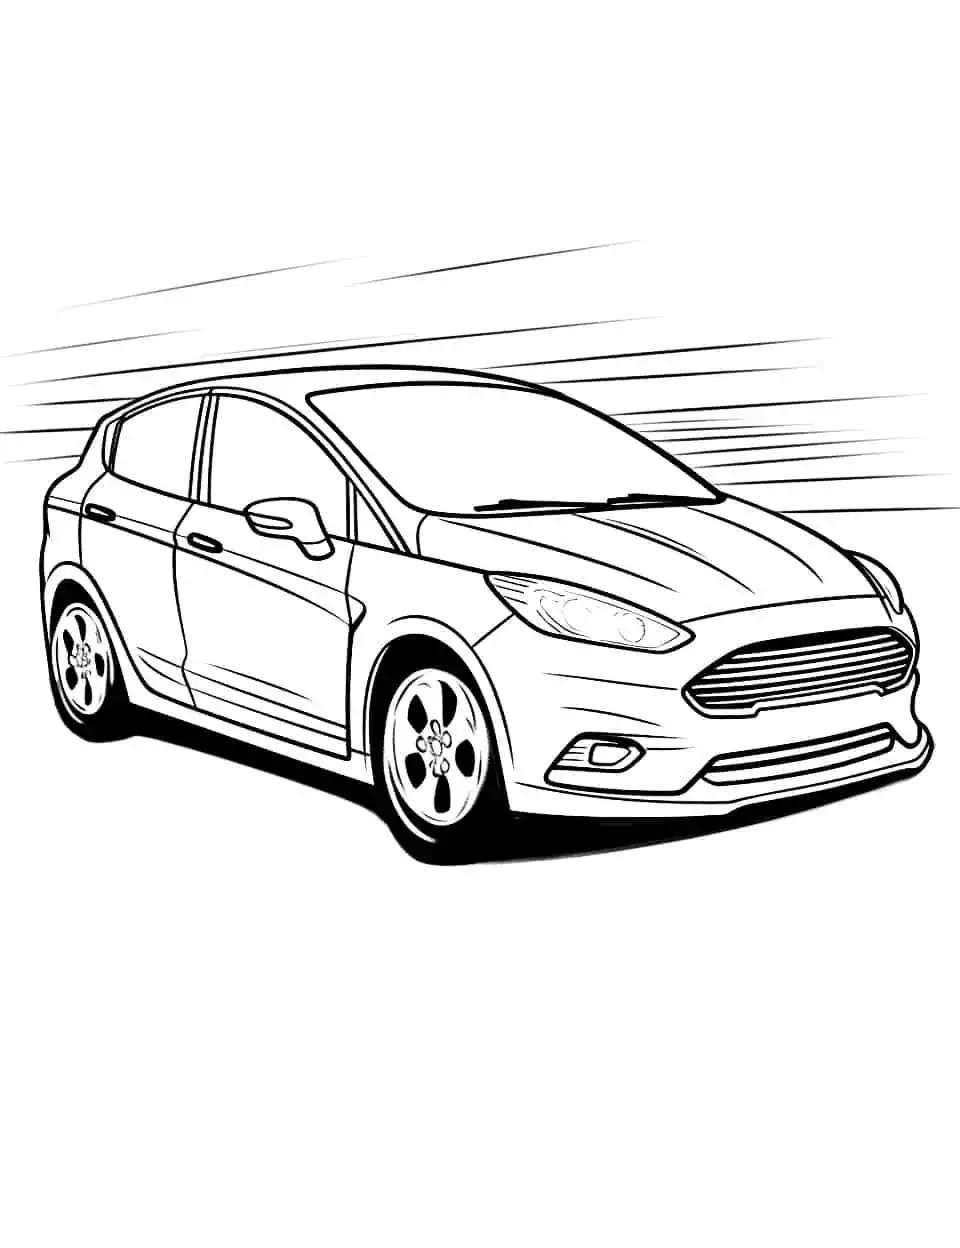 Friendly Ford Fiesta Car Coloring Page - A compact, cheerful Ford Fiesta for preschoolers to color.